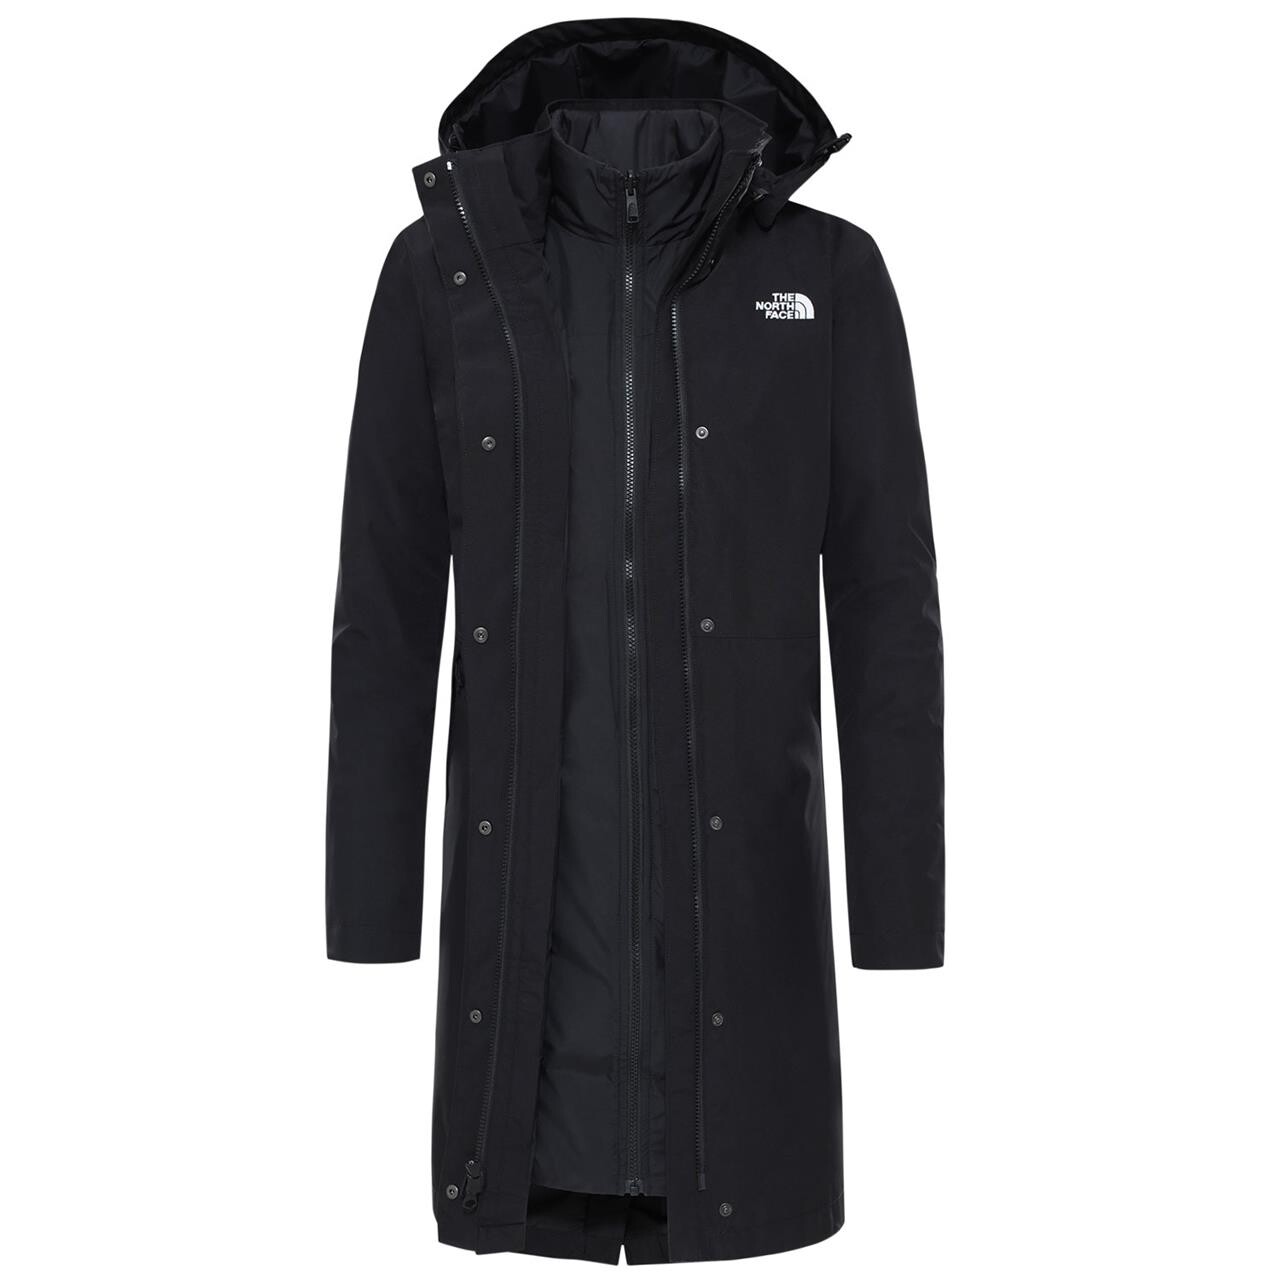 Billede af The North Face Womens Recycled Suzanne Triclimate Jacket (Sort (TNF BLACK/TNF BLACK) Small)